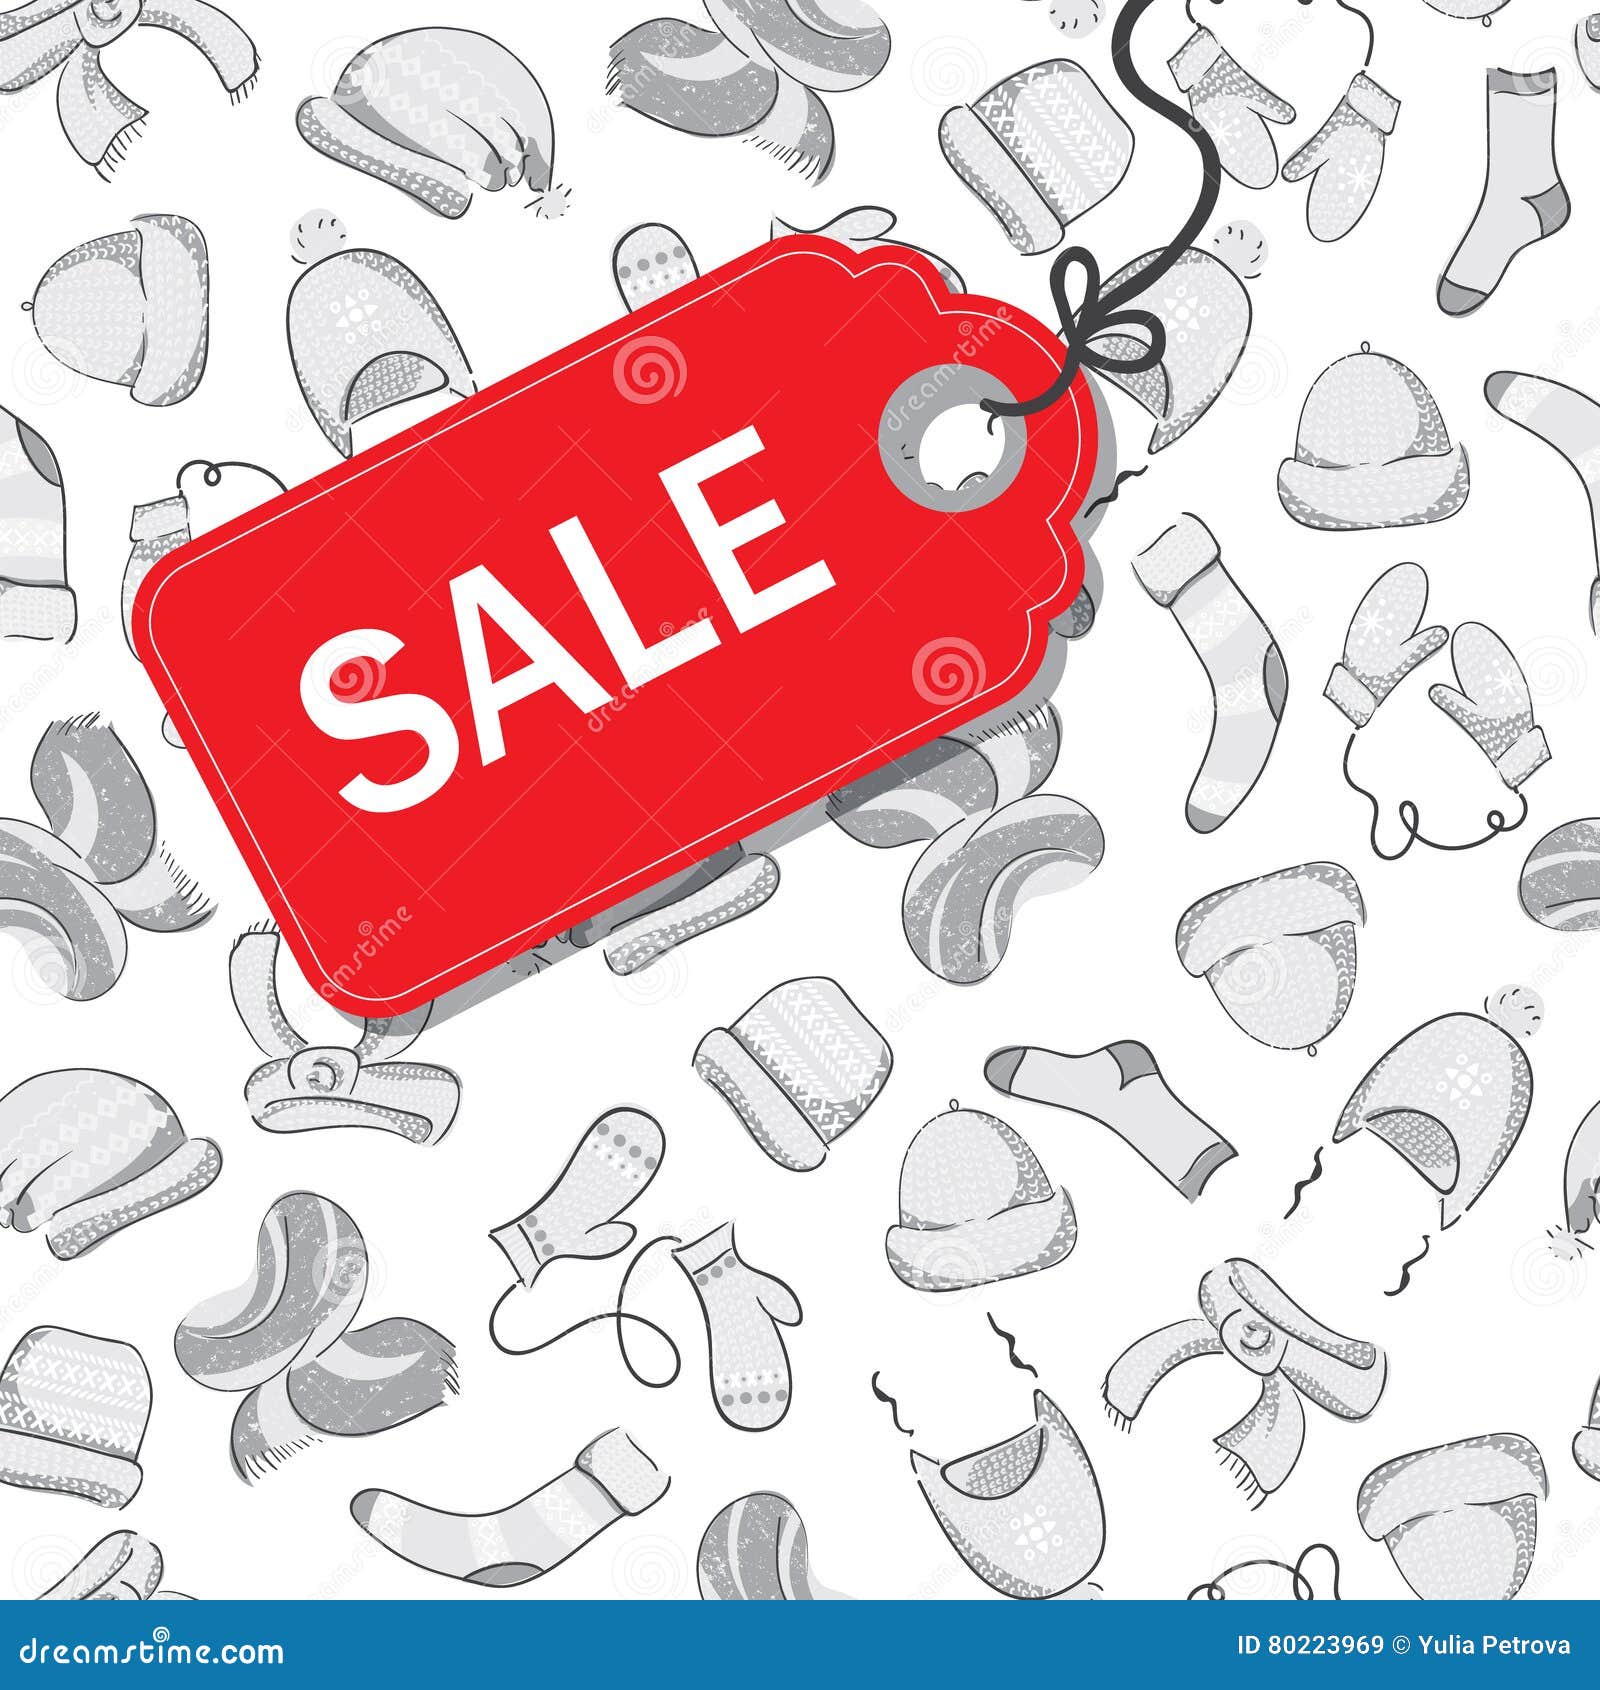 Winter Sale Shopping Concept. Stock Vector - Illustration of fabric ...